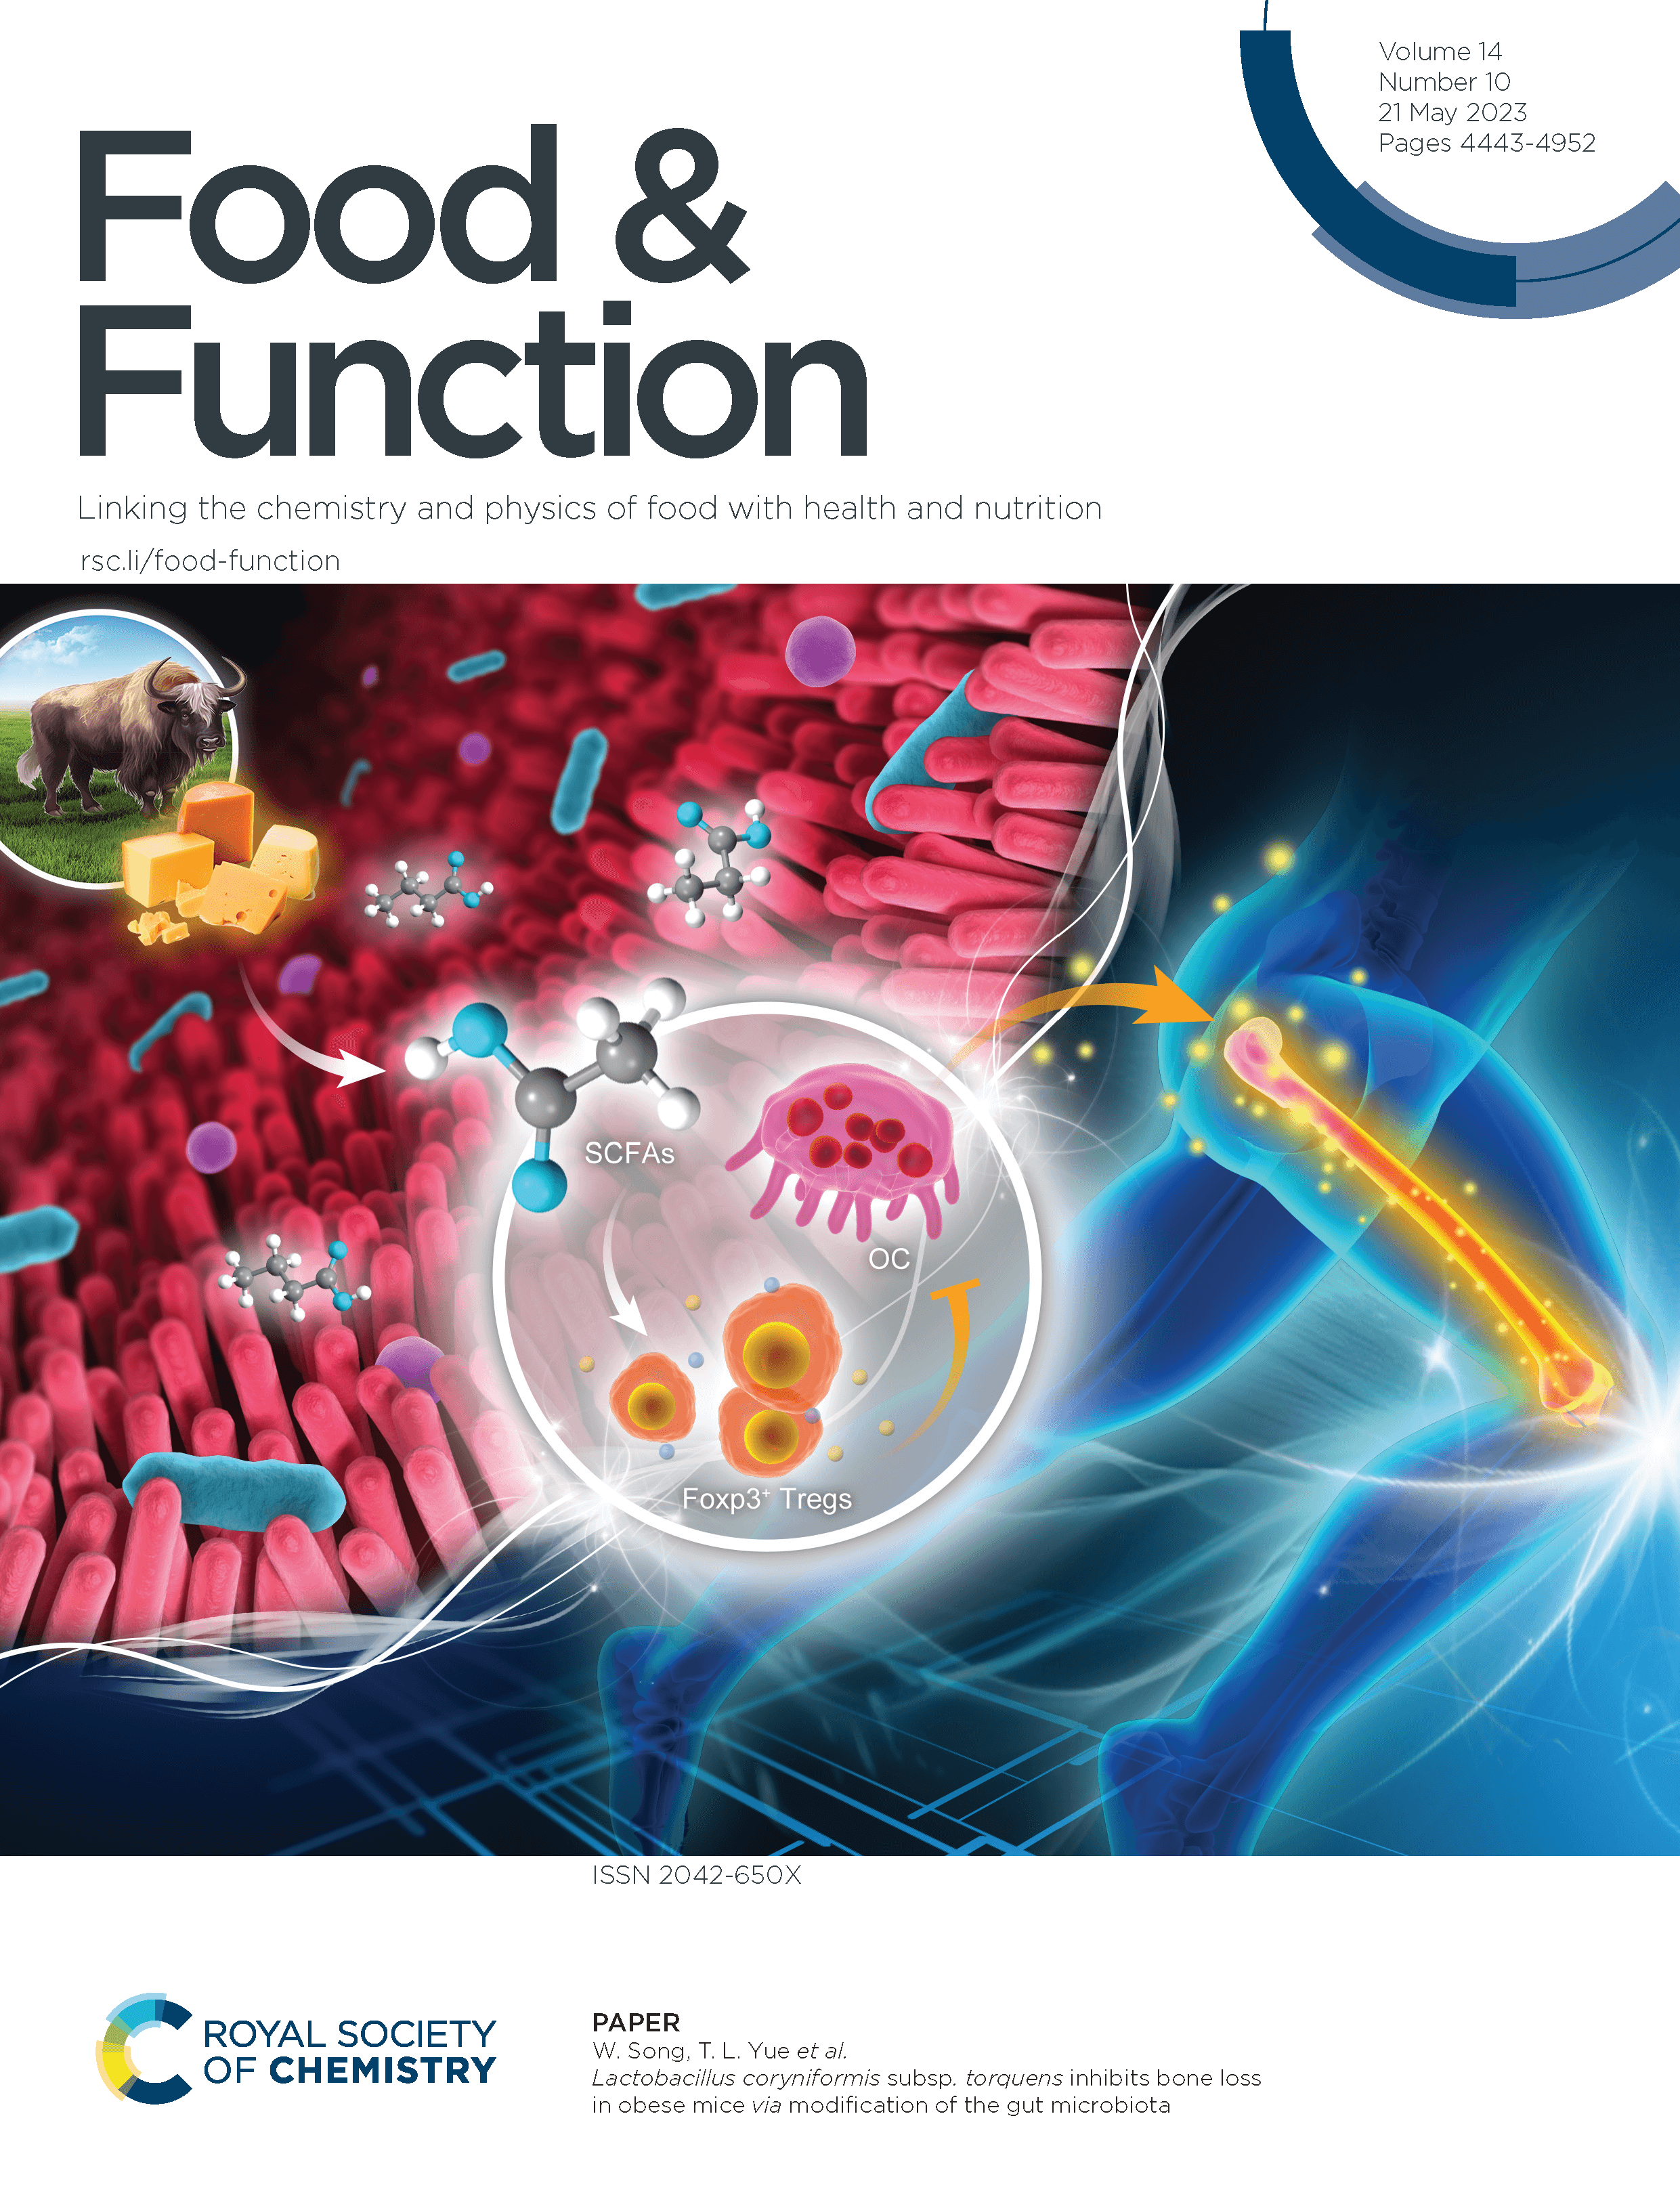 LetPub Journal Cover Art Design - β-Sitosterol protects against food allergic response in BALB/c mice by regulating the intestinal barrier function and reconstructing the gut microbiota structure